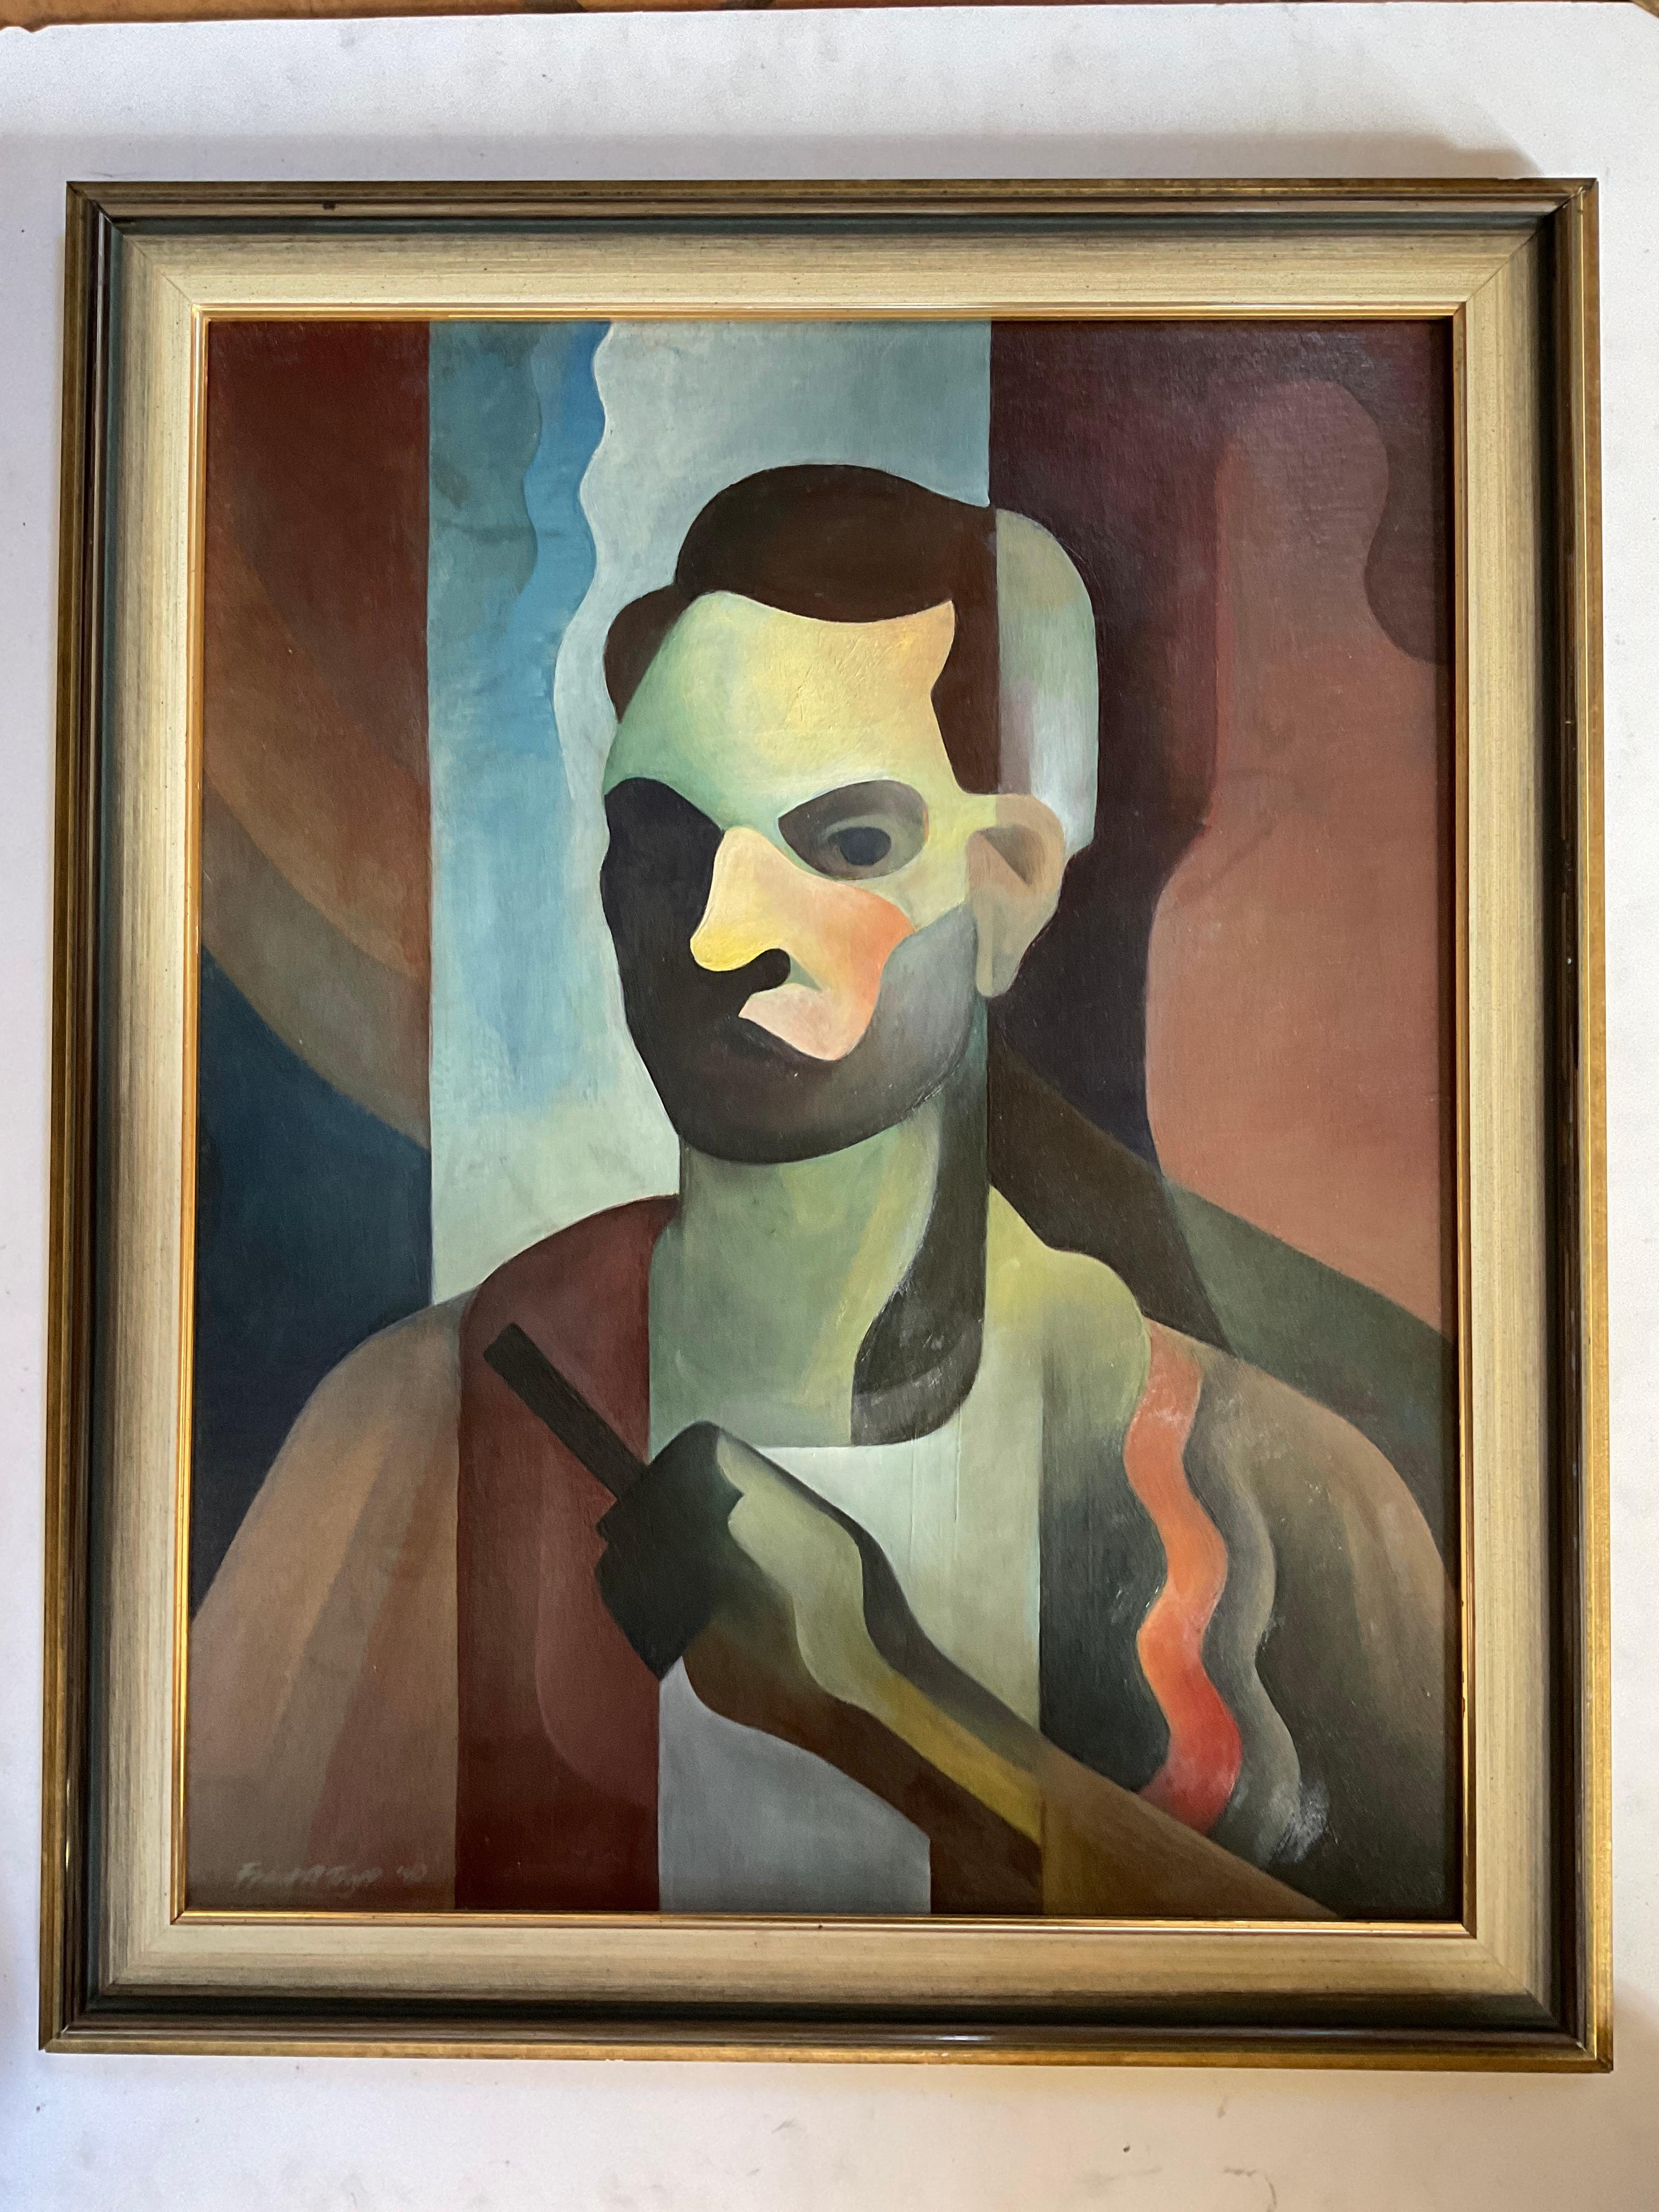 This is a very stylized and powerful portrait by the noted artist Frank Anderson Trapp.  It is dated 1940, and is very much in the modern style of French painters Ferdinand Leger and Le Corbusier.

Frank A. Trapp was born in Pittsburg in 1922. As a